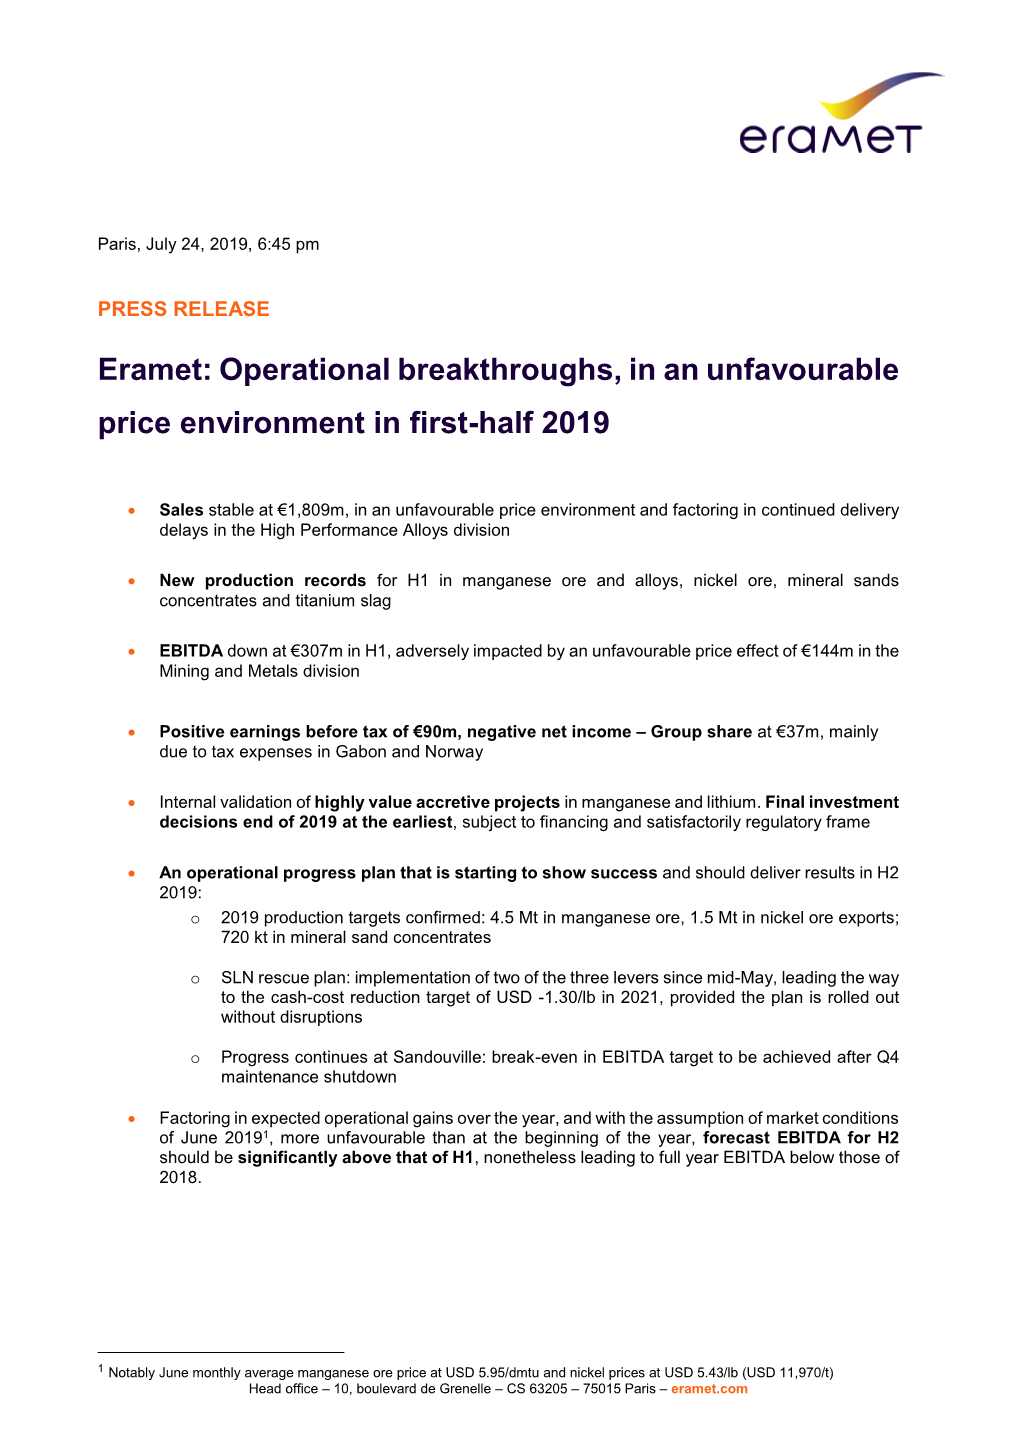 Eramet: Operational Breakthroughs, in an Unfavourable Price Environment in First-Half 2019